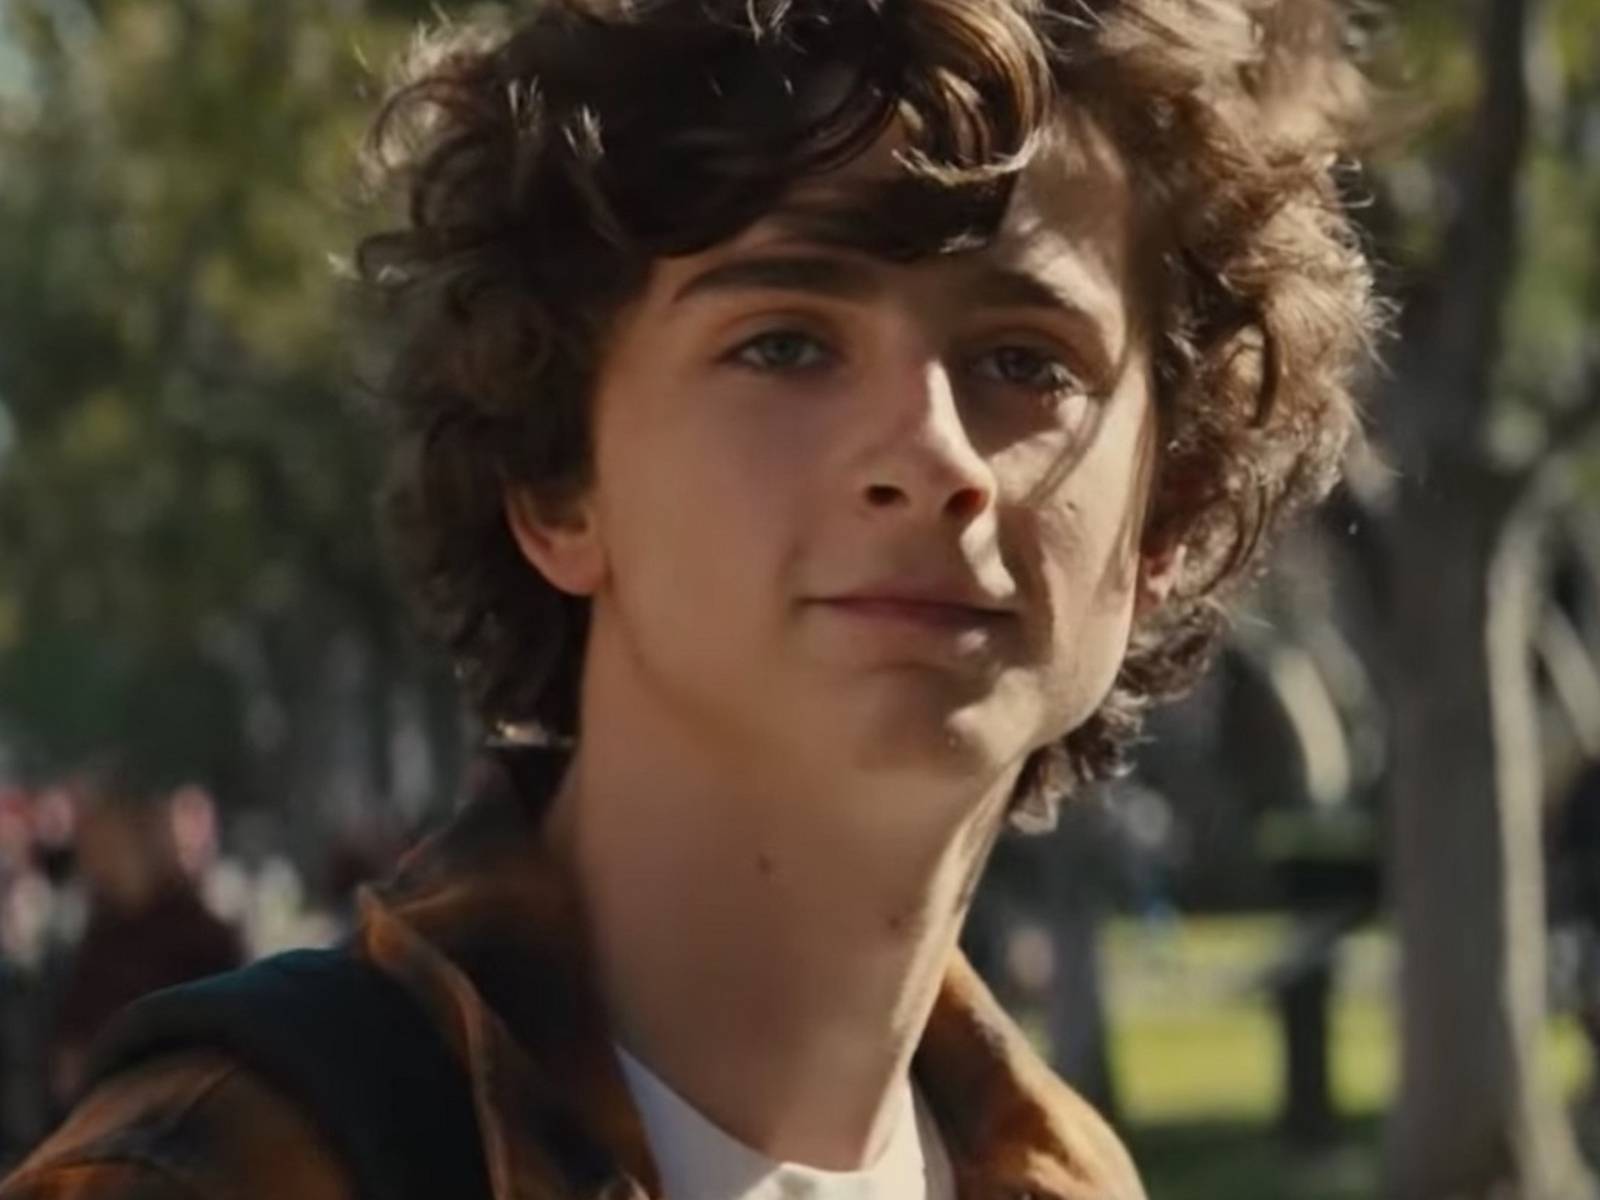 Mad about the Boy: My journey to becoming Timothee Chalamet's